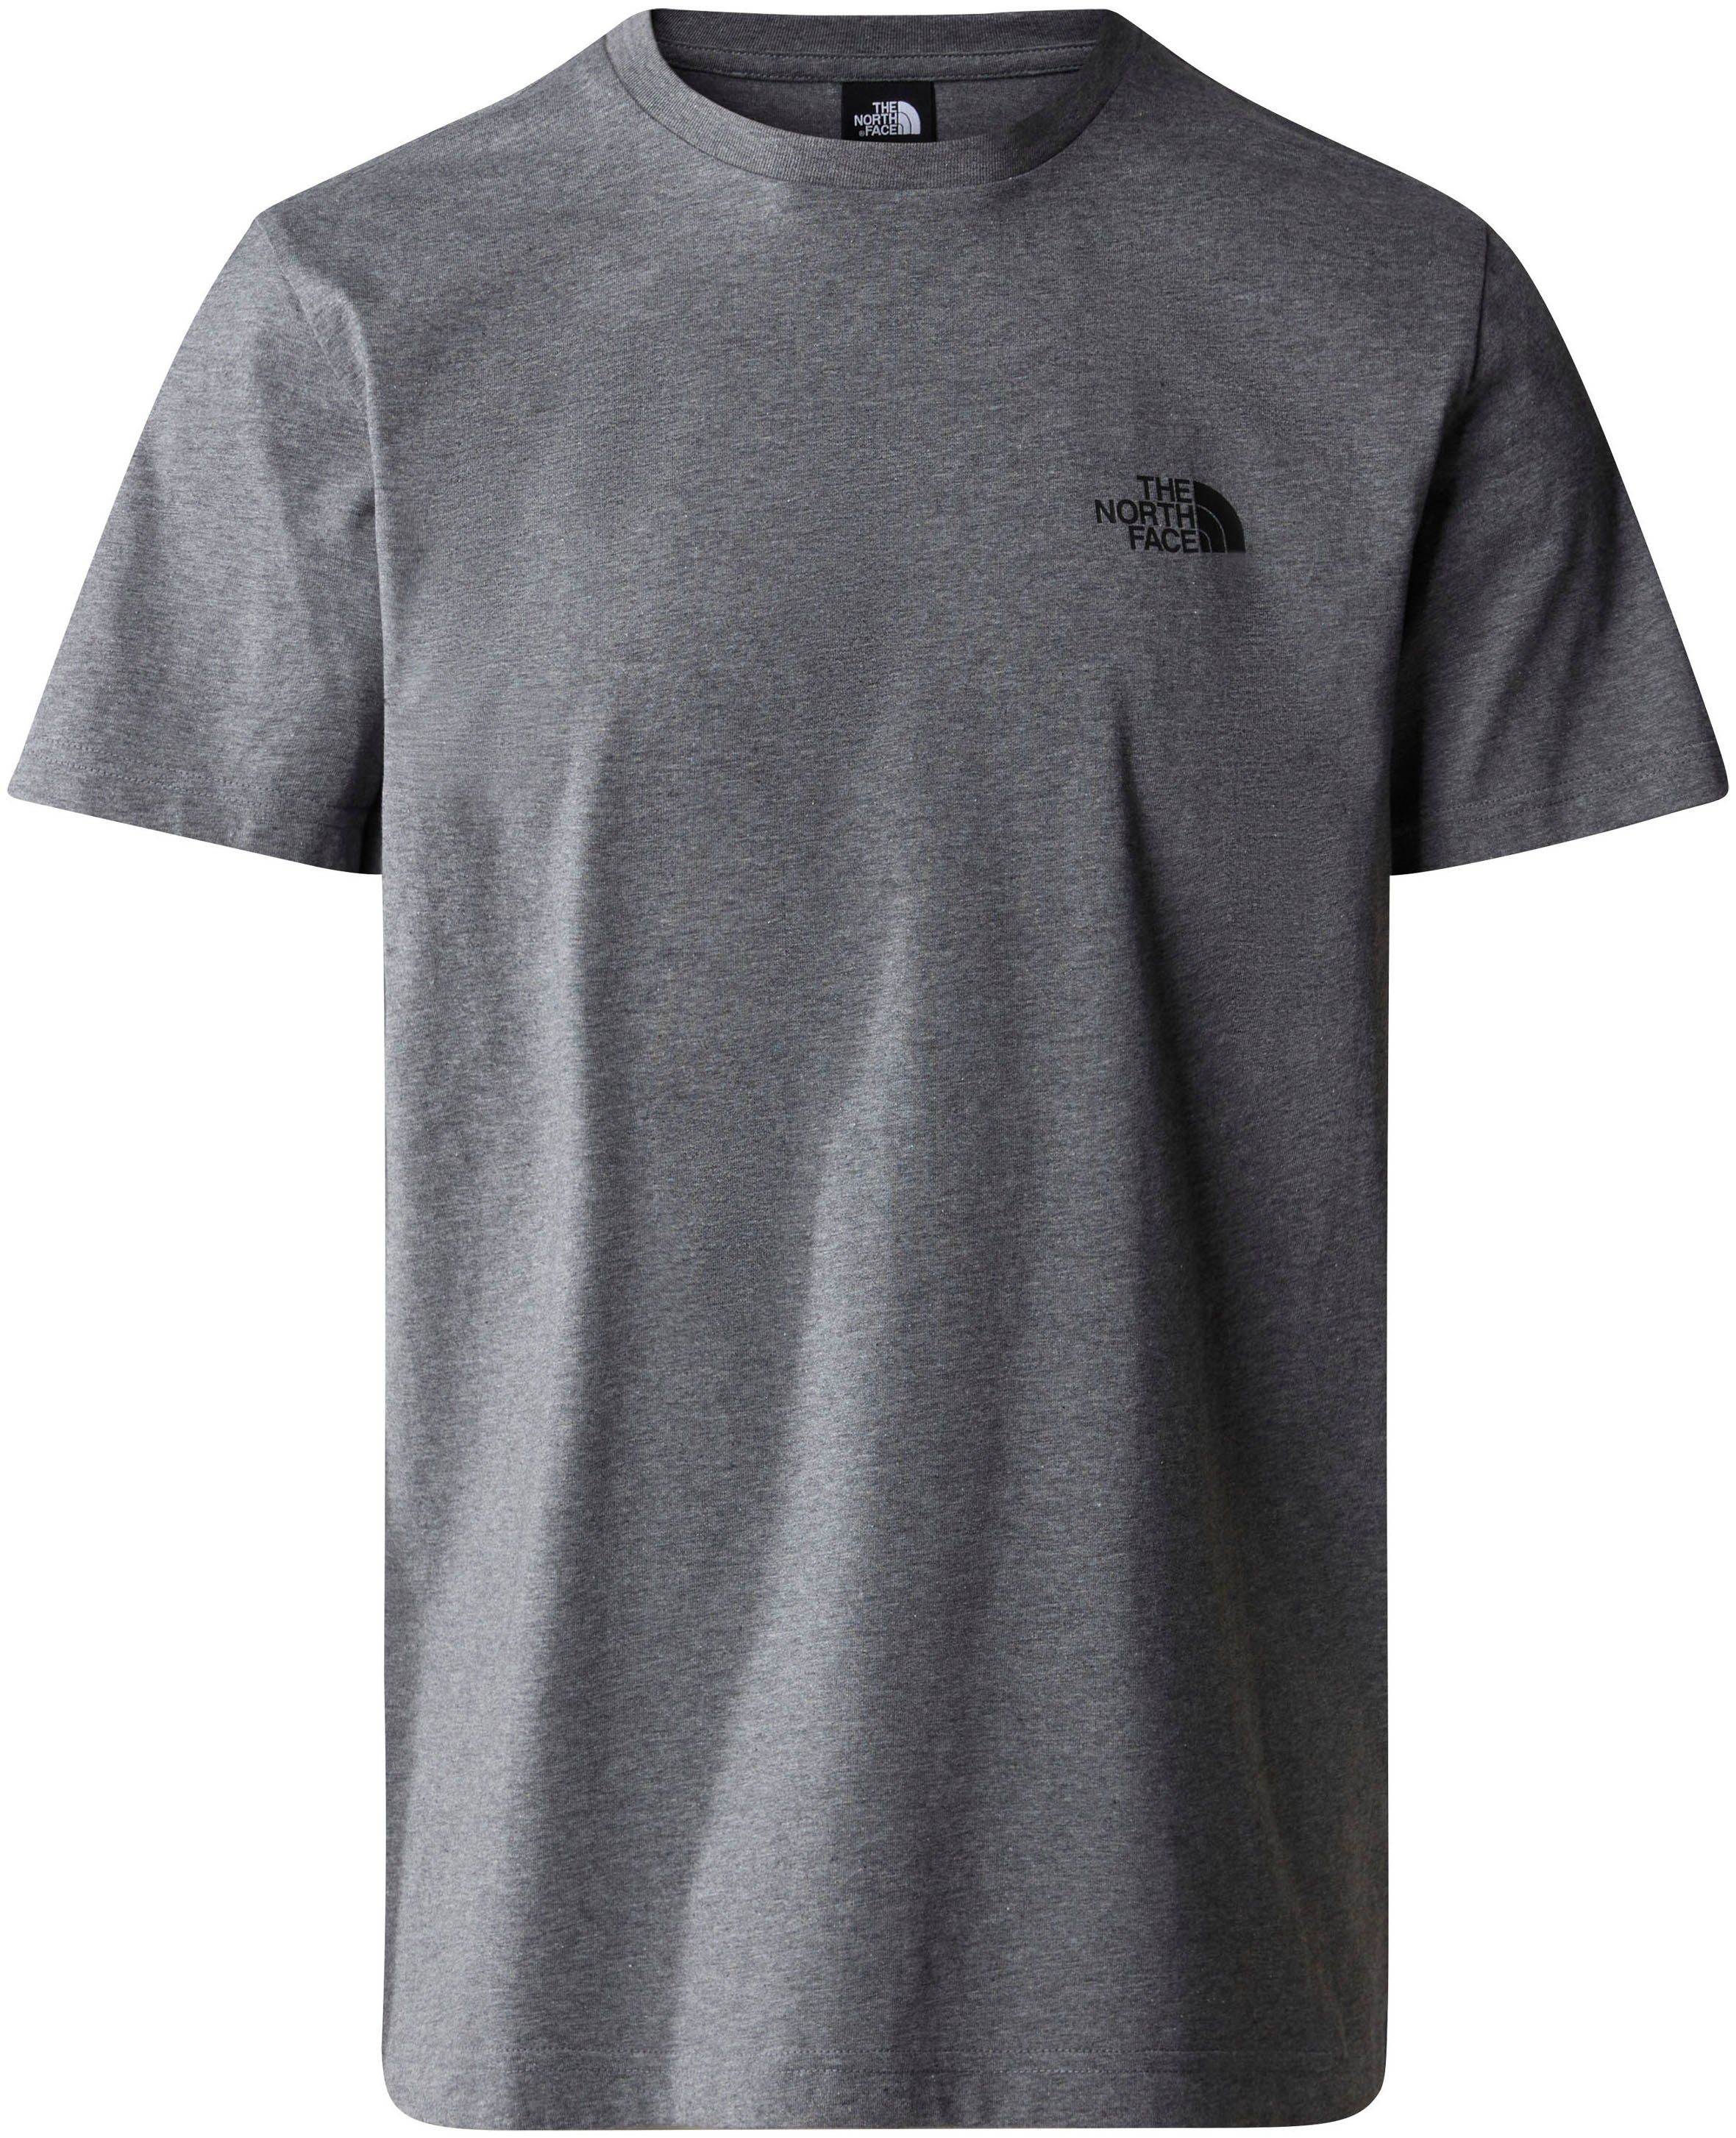 The North Face Simple Dome T-Shirt Grey- Grey